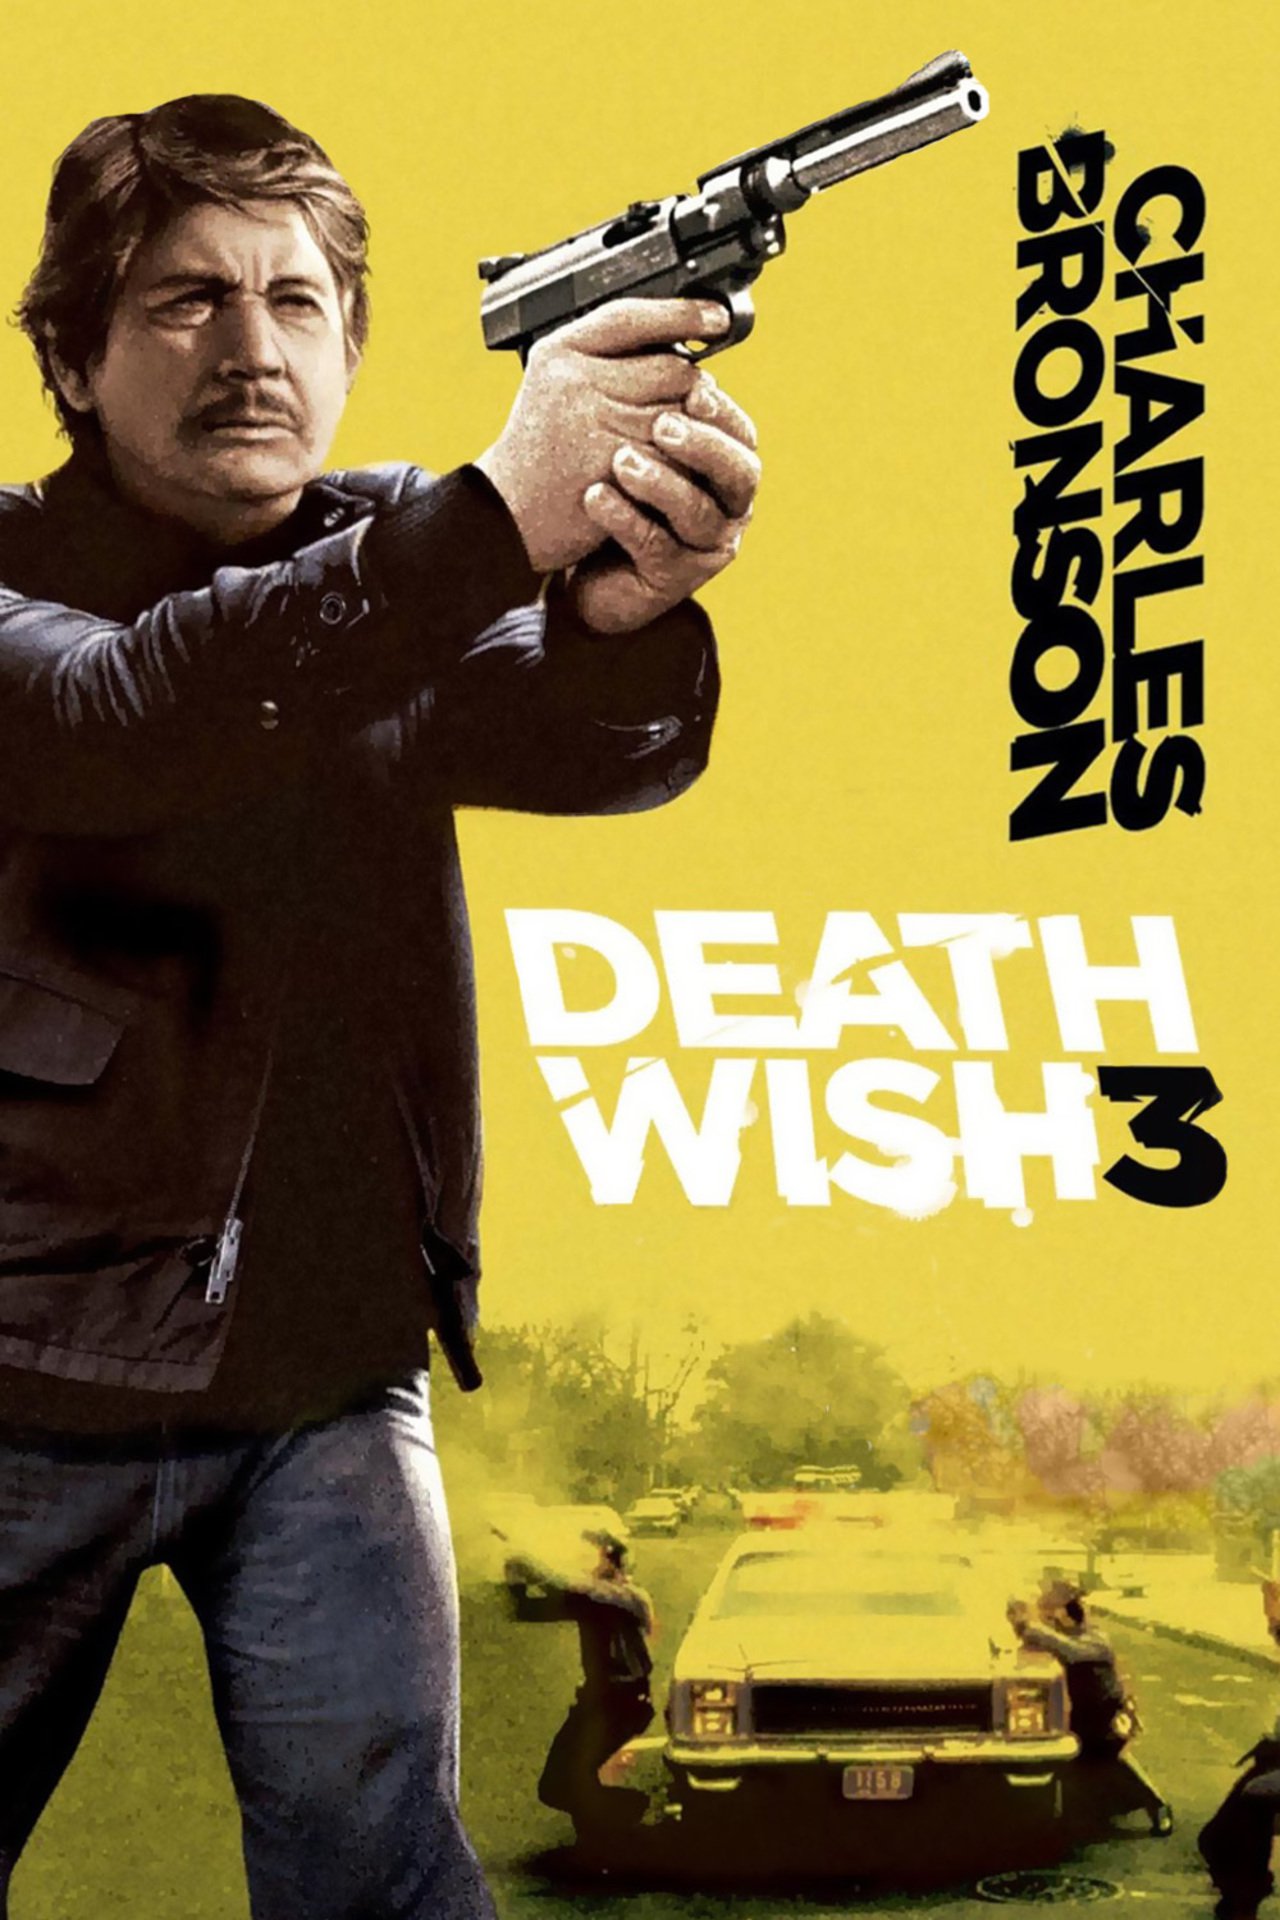 Amazing Death Wish 3 Pictures & Backgrounds